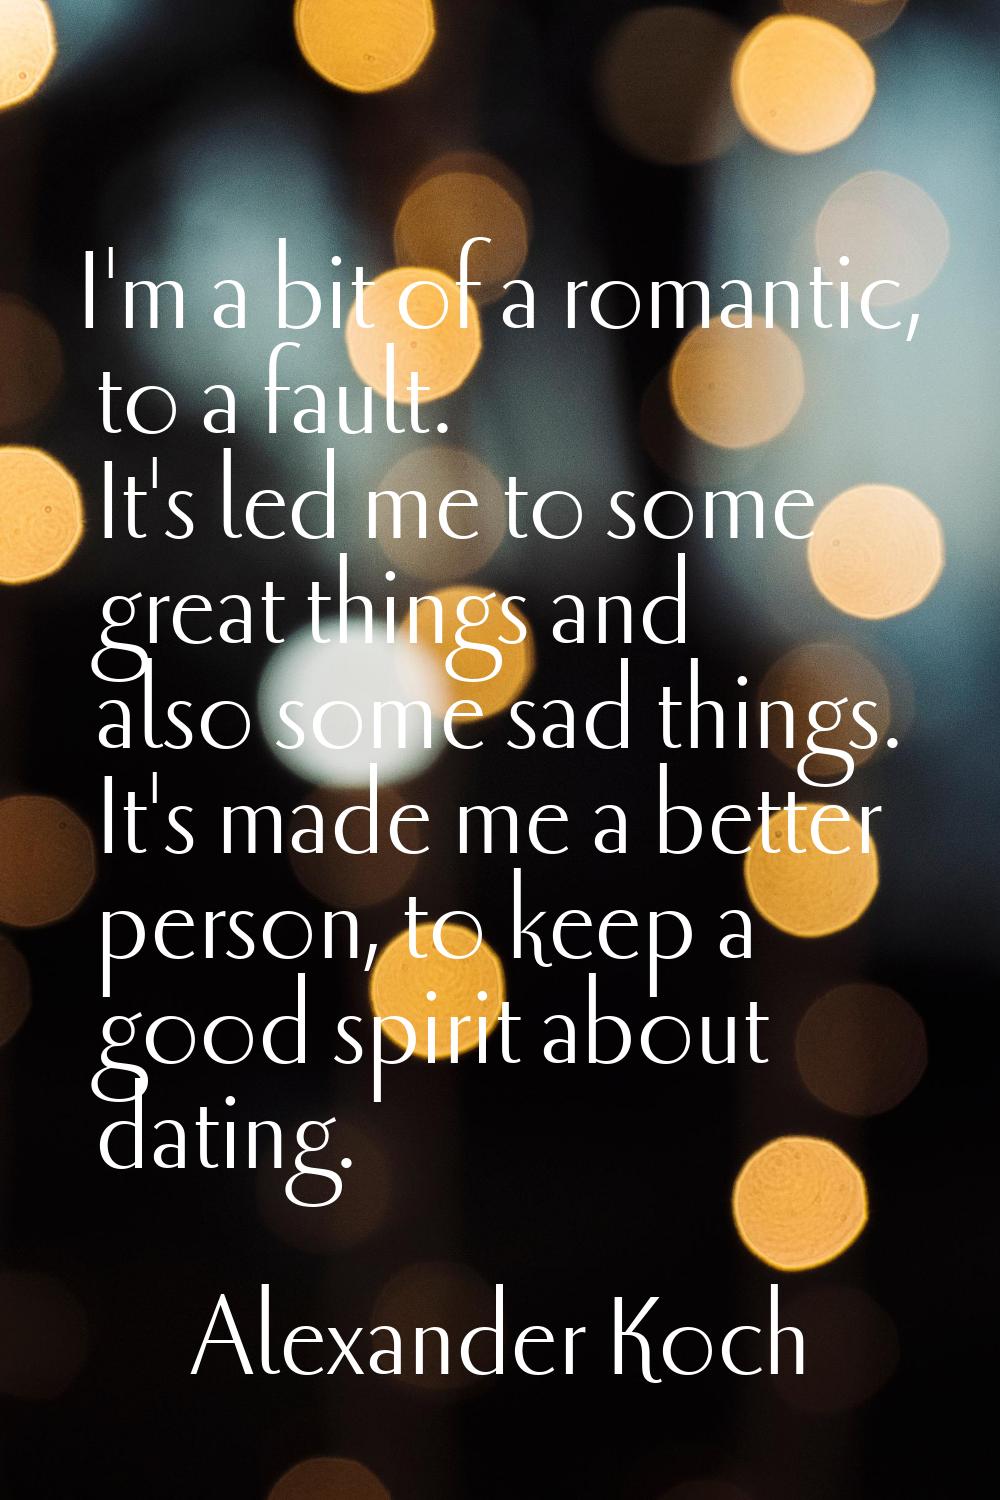 I'm a bit of a romantic, to a fault. It's led me to some great things and also some sad things. It'